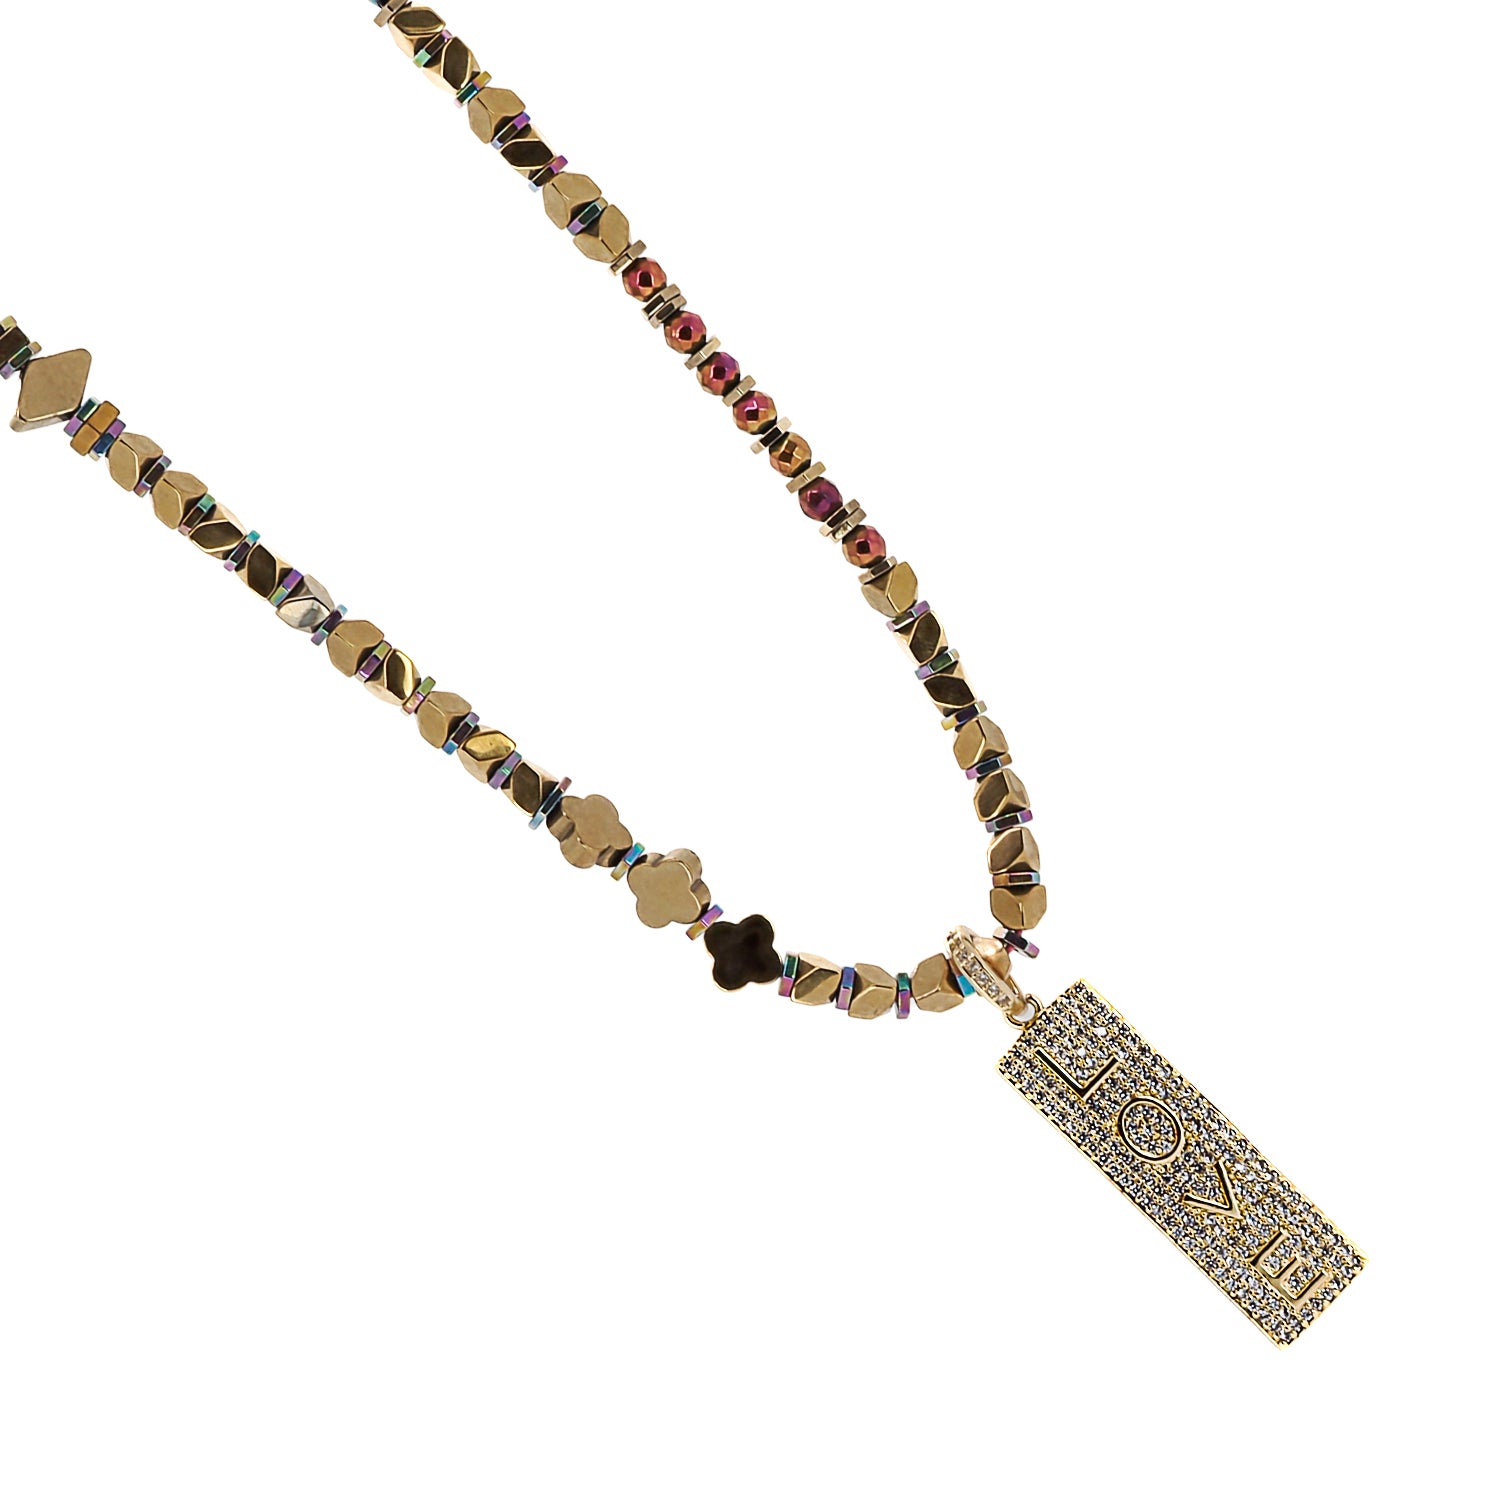 Necklace Length of 34 Inches with Pendant. The necklace boasts a lengthy 34-inch chain with a pendant, making it an eye-catching statement piece.